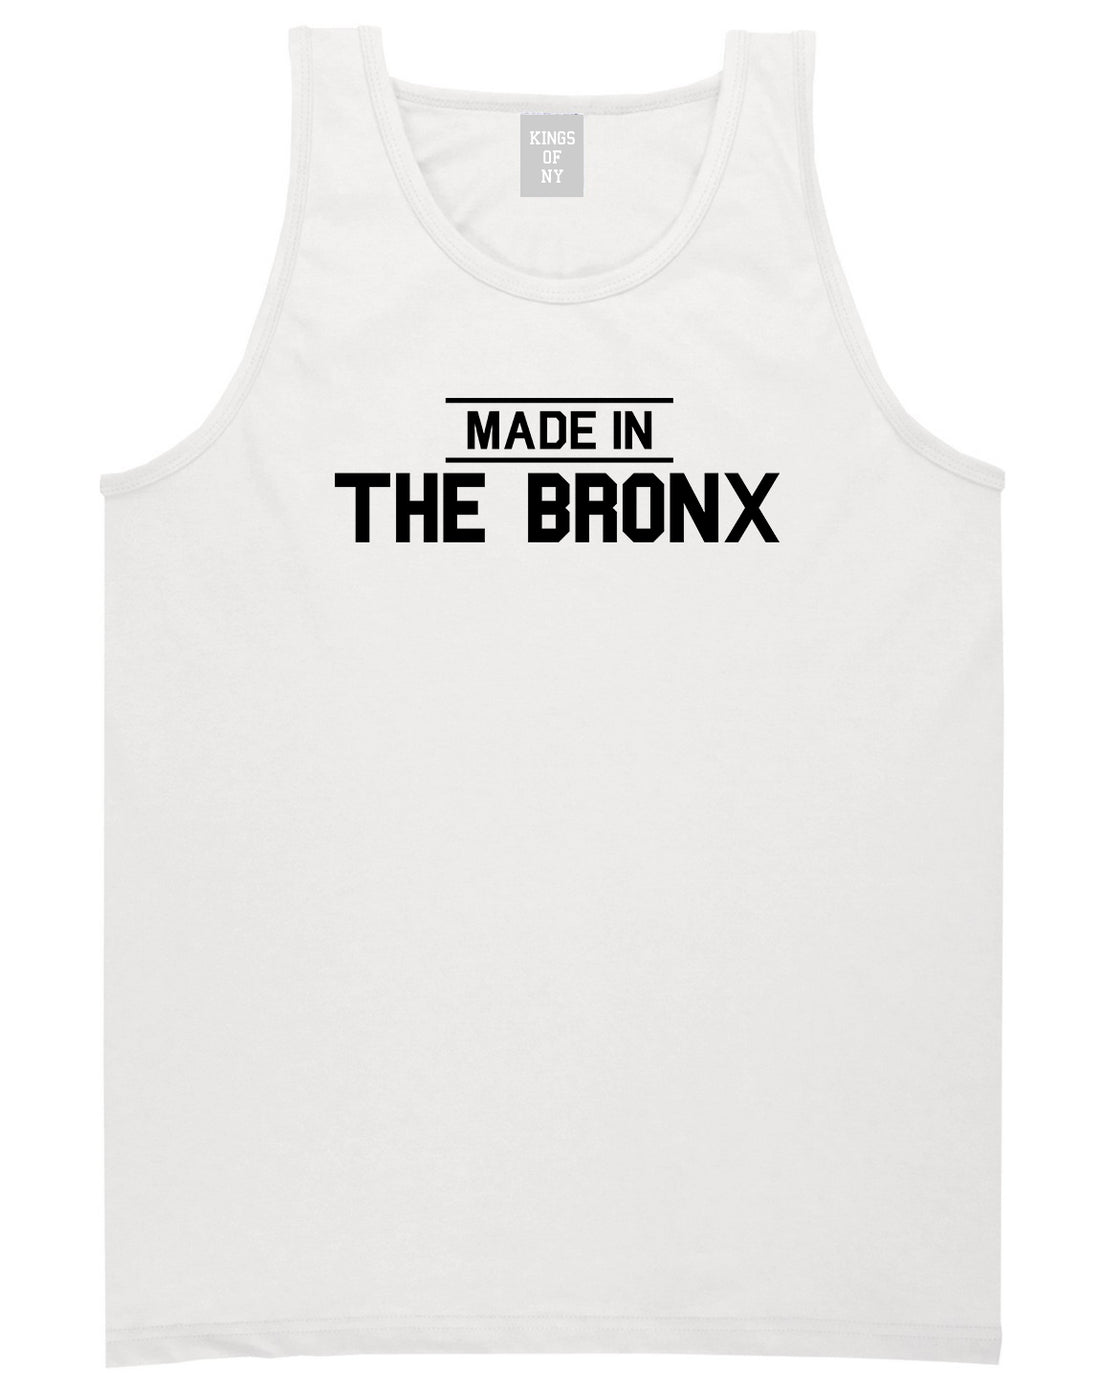 Made In The Bronx Mens Tank Top Shirt White by Kings Of NY